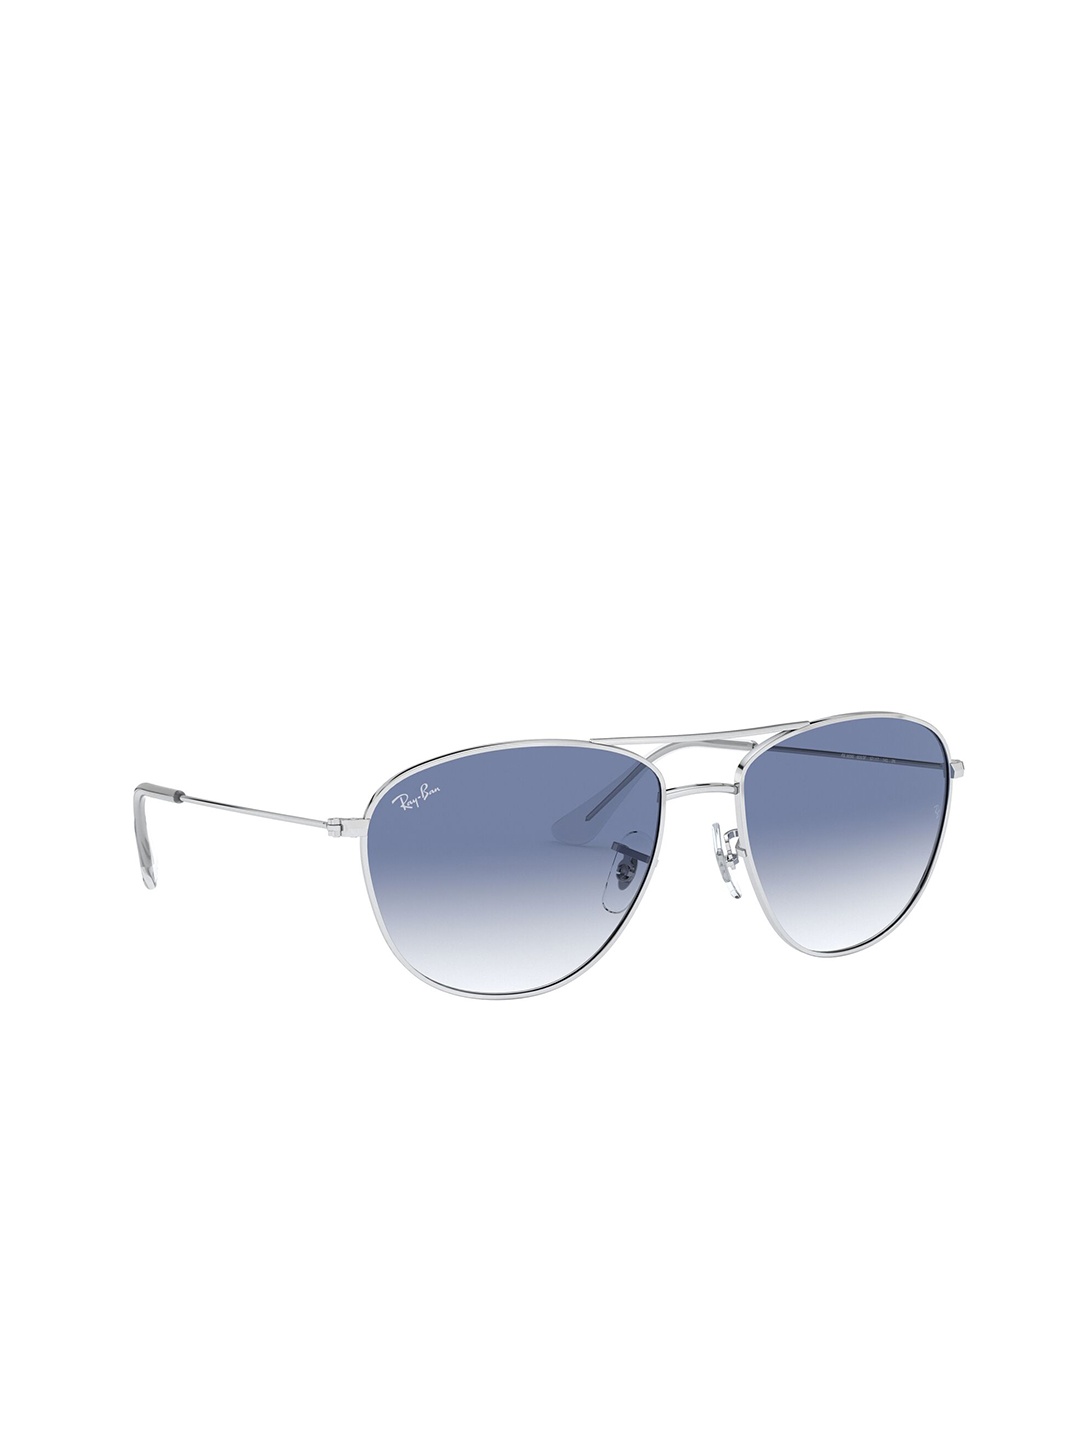 

Ray-Ban Unisex Square Sunglasses with UV Protected Lens, Blue